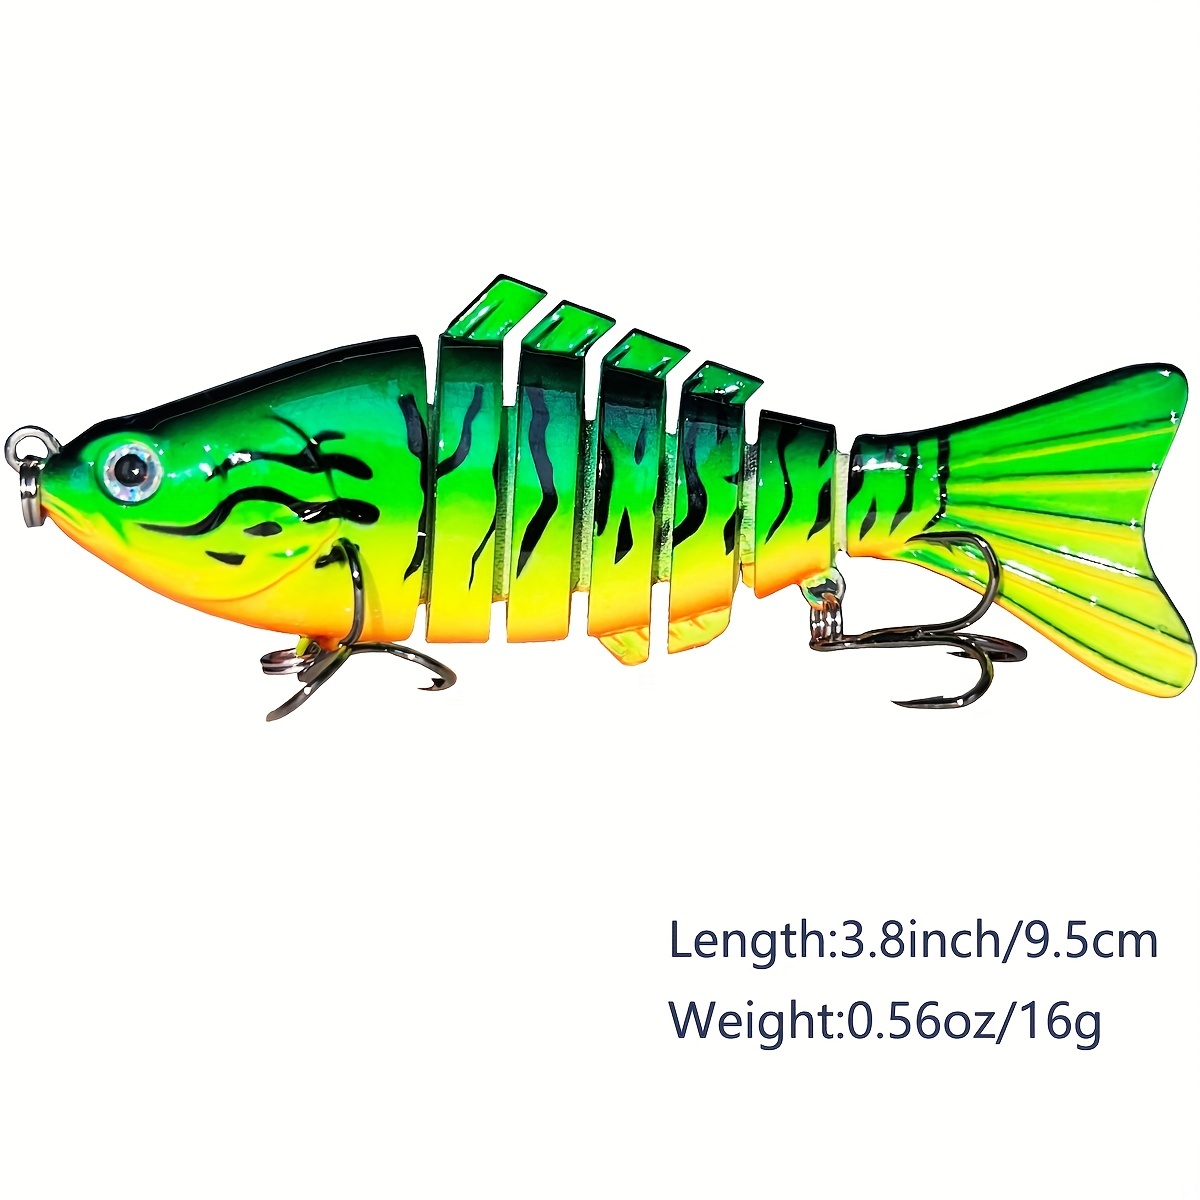  Fishing Lures, Full-Size Multi Jointed Swimbait Slow Sinking  Segmented Bass Fishing Lure, Swimming Fishing Lure Freshwater Or Saltwater Perch  Pike Walleye Bass Lures, Ideal Fishing Gifts